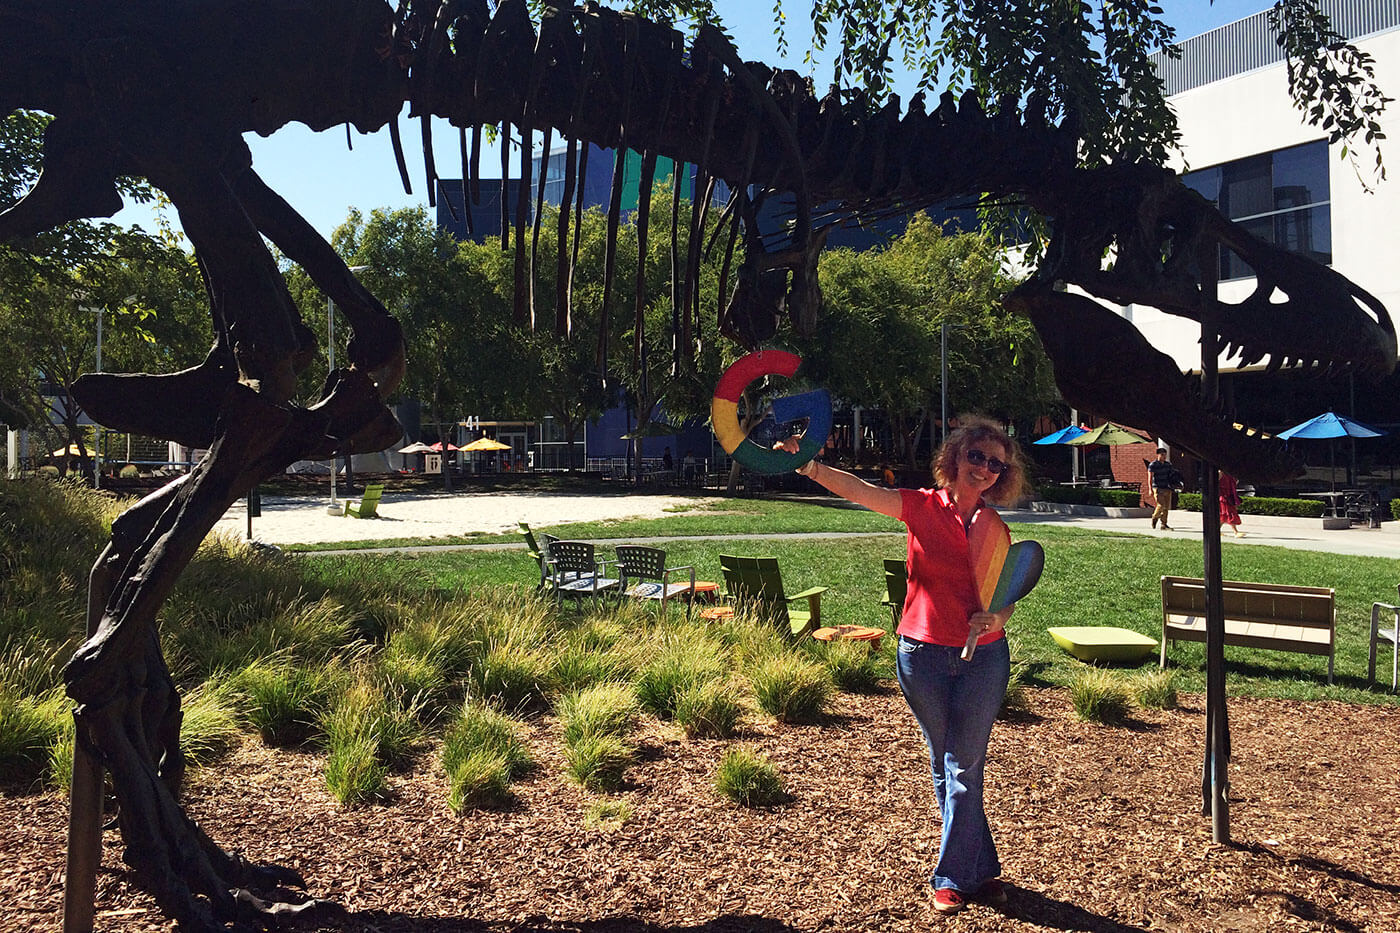 Rita Aleluia next to a dinosaur at the Google facility in the United States.